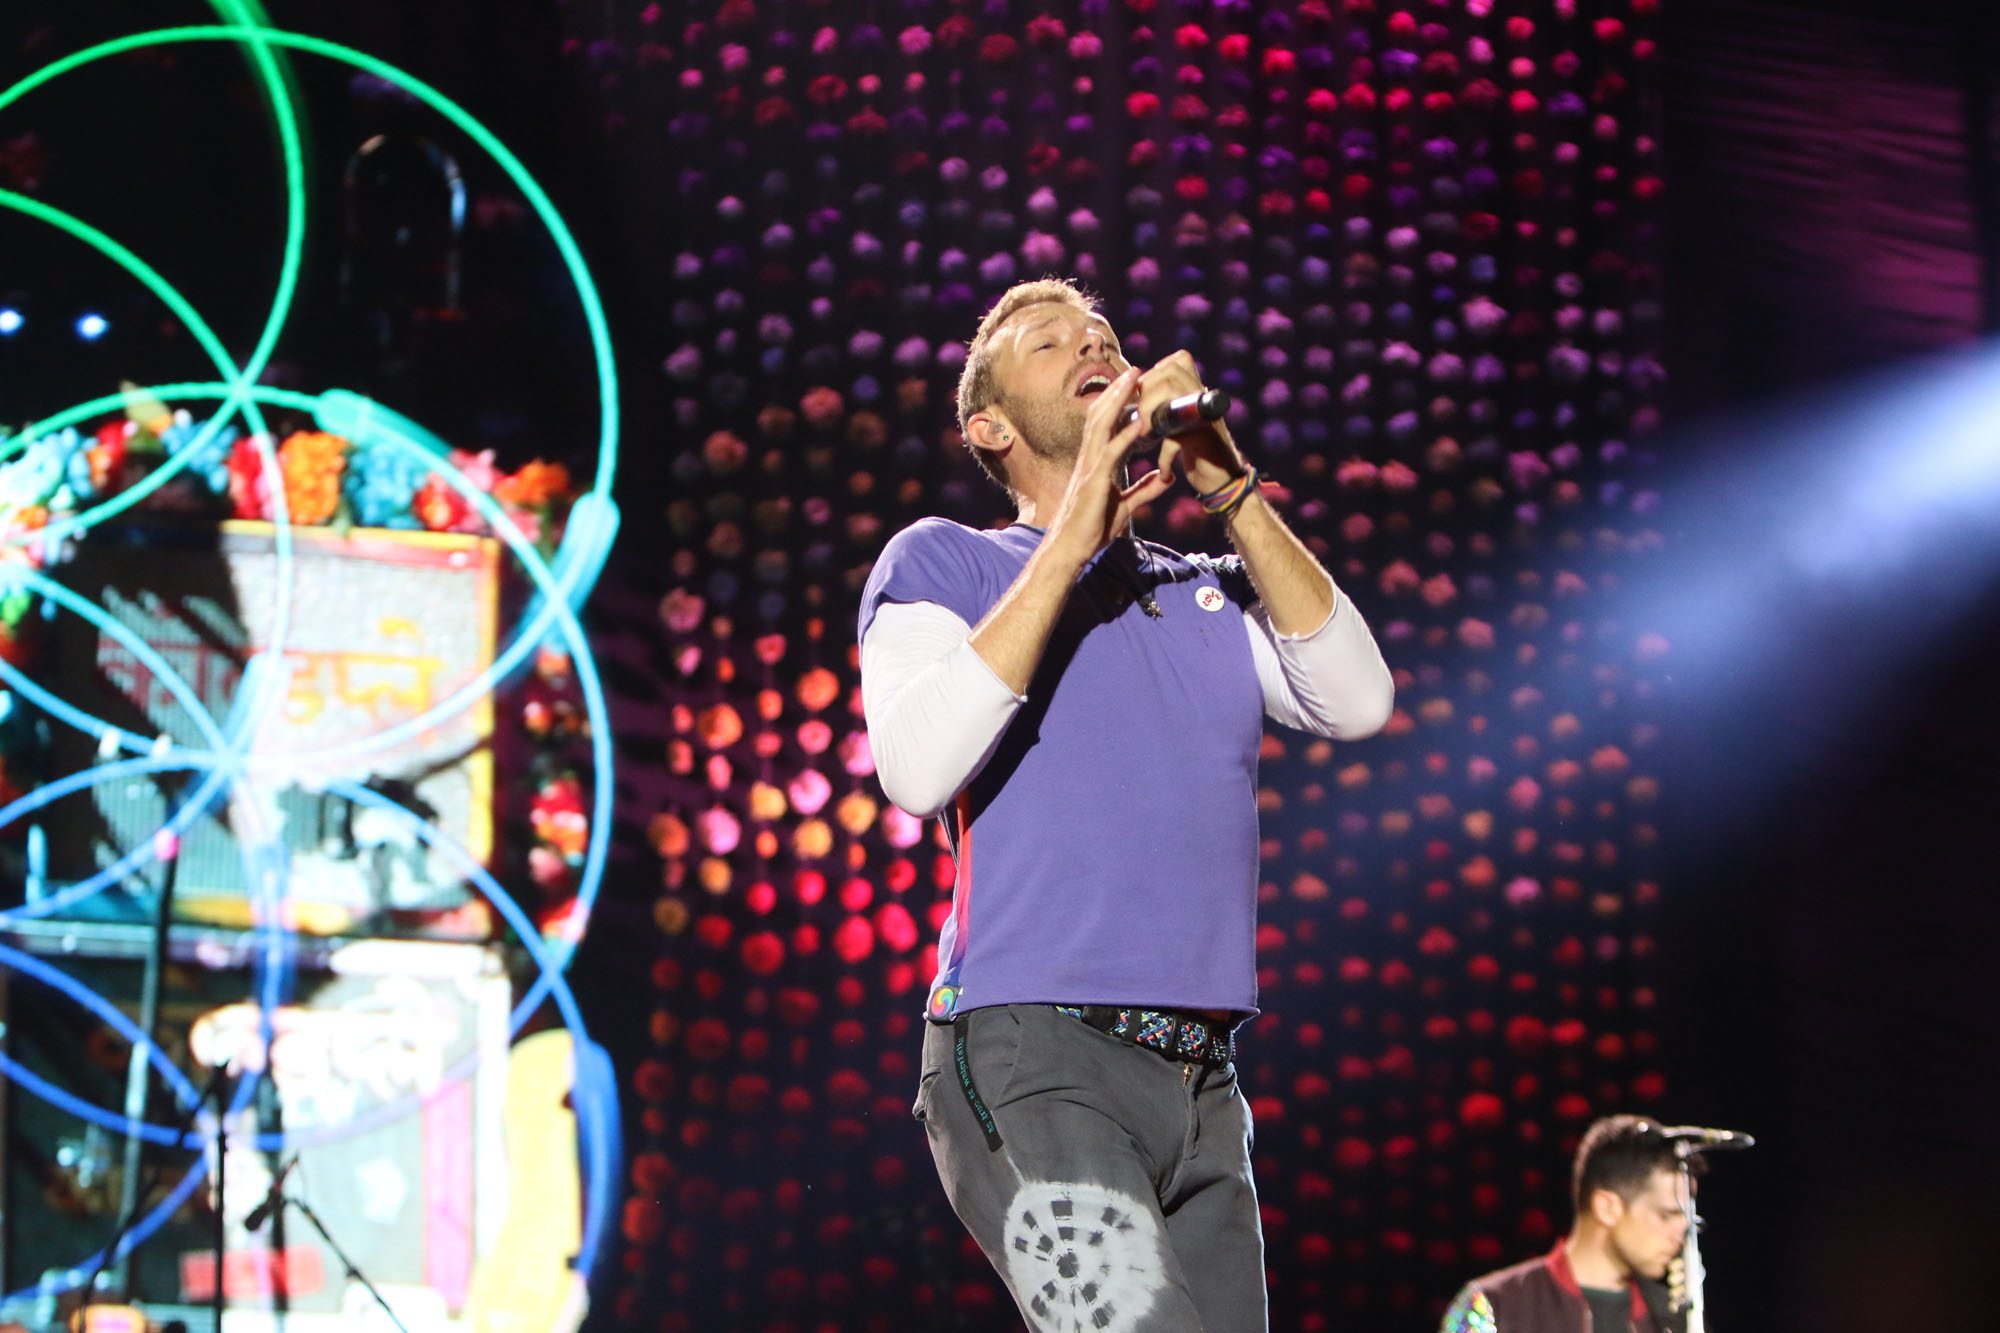 IN PHOTOS: Coldplay’s ‘A Head Full of Dreams’ concert in Manila